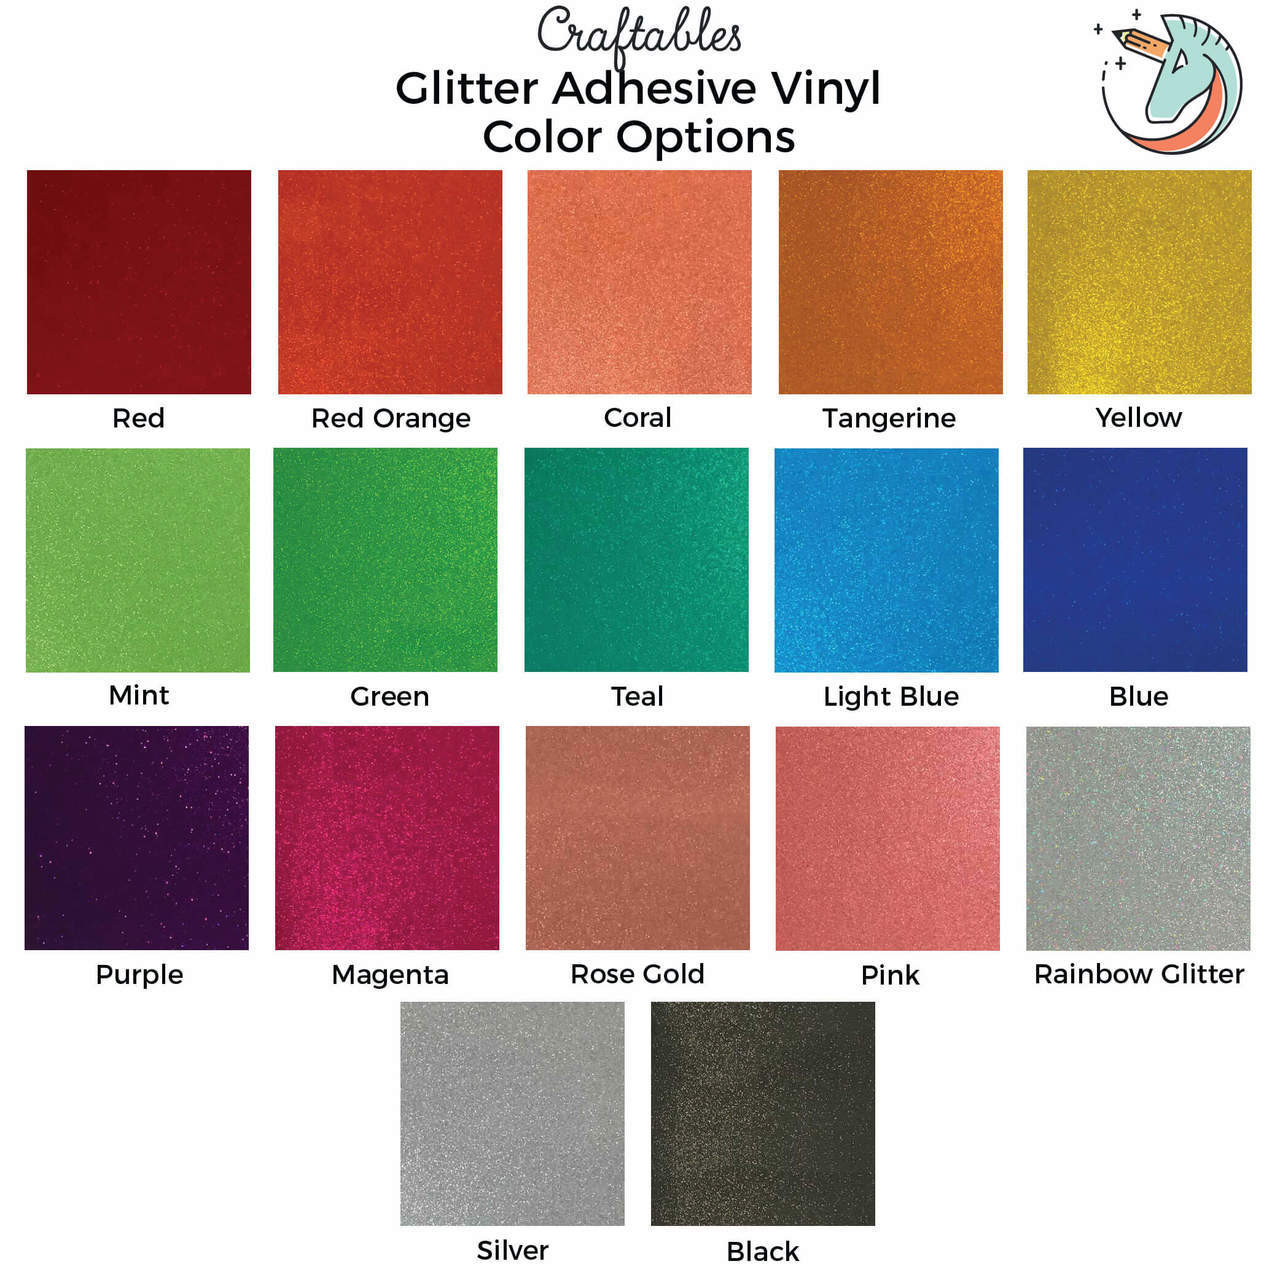 Pink Glitter Adhesive Vinyl Sheets By Craftables